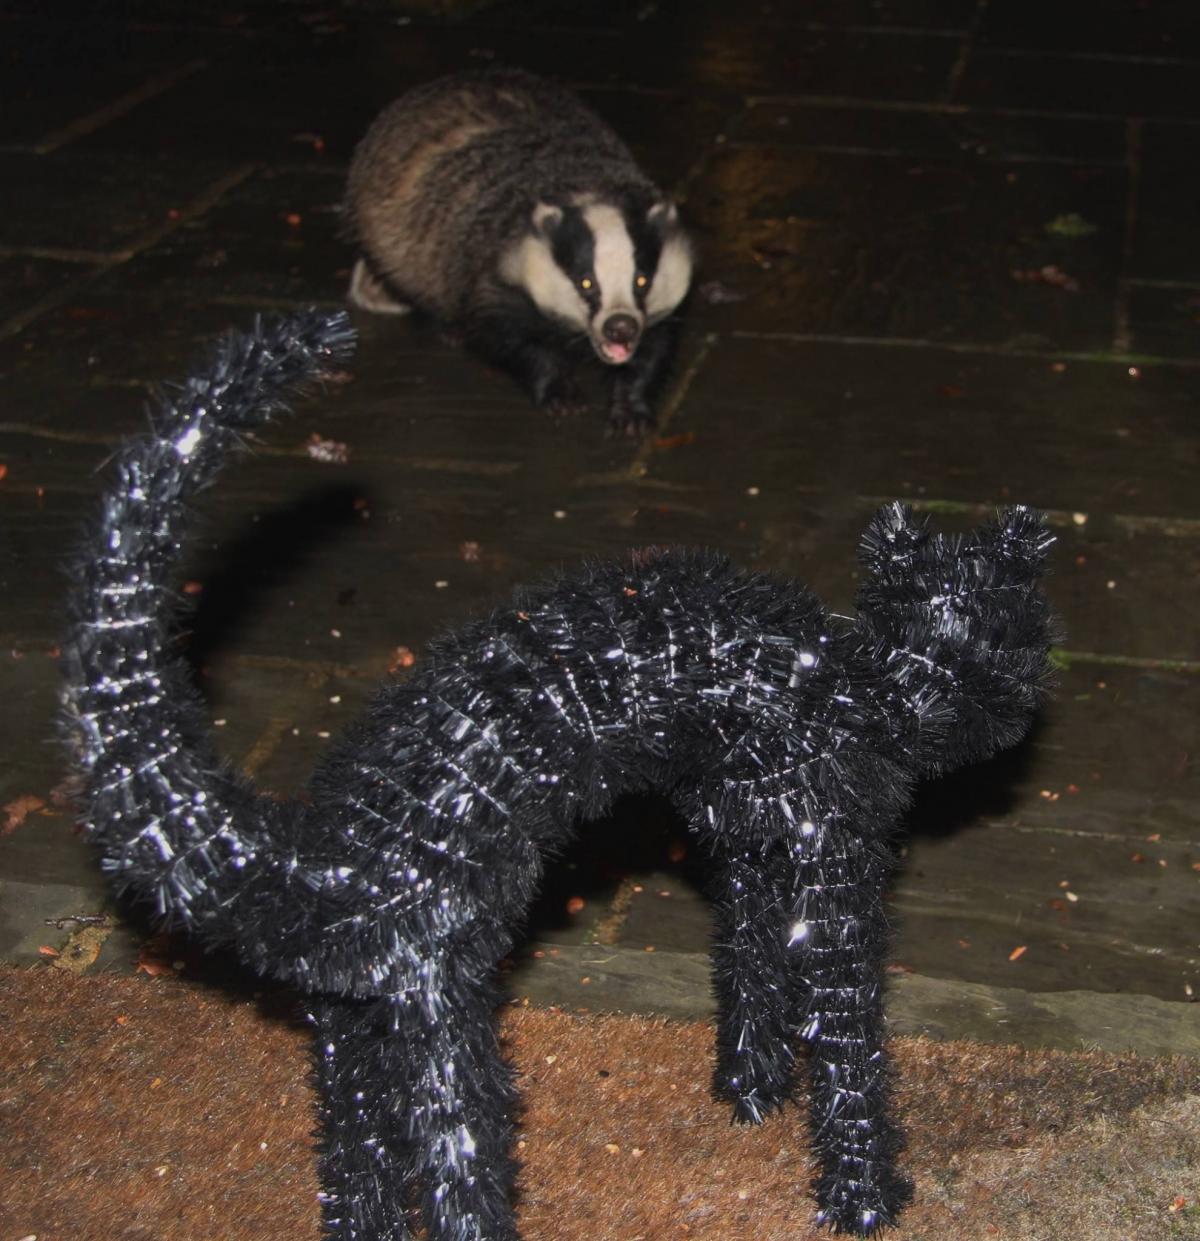 Don't scare a badger! that's the moral of this photo by Sorrell Fielding